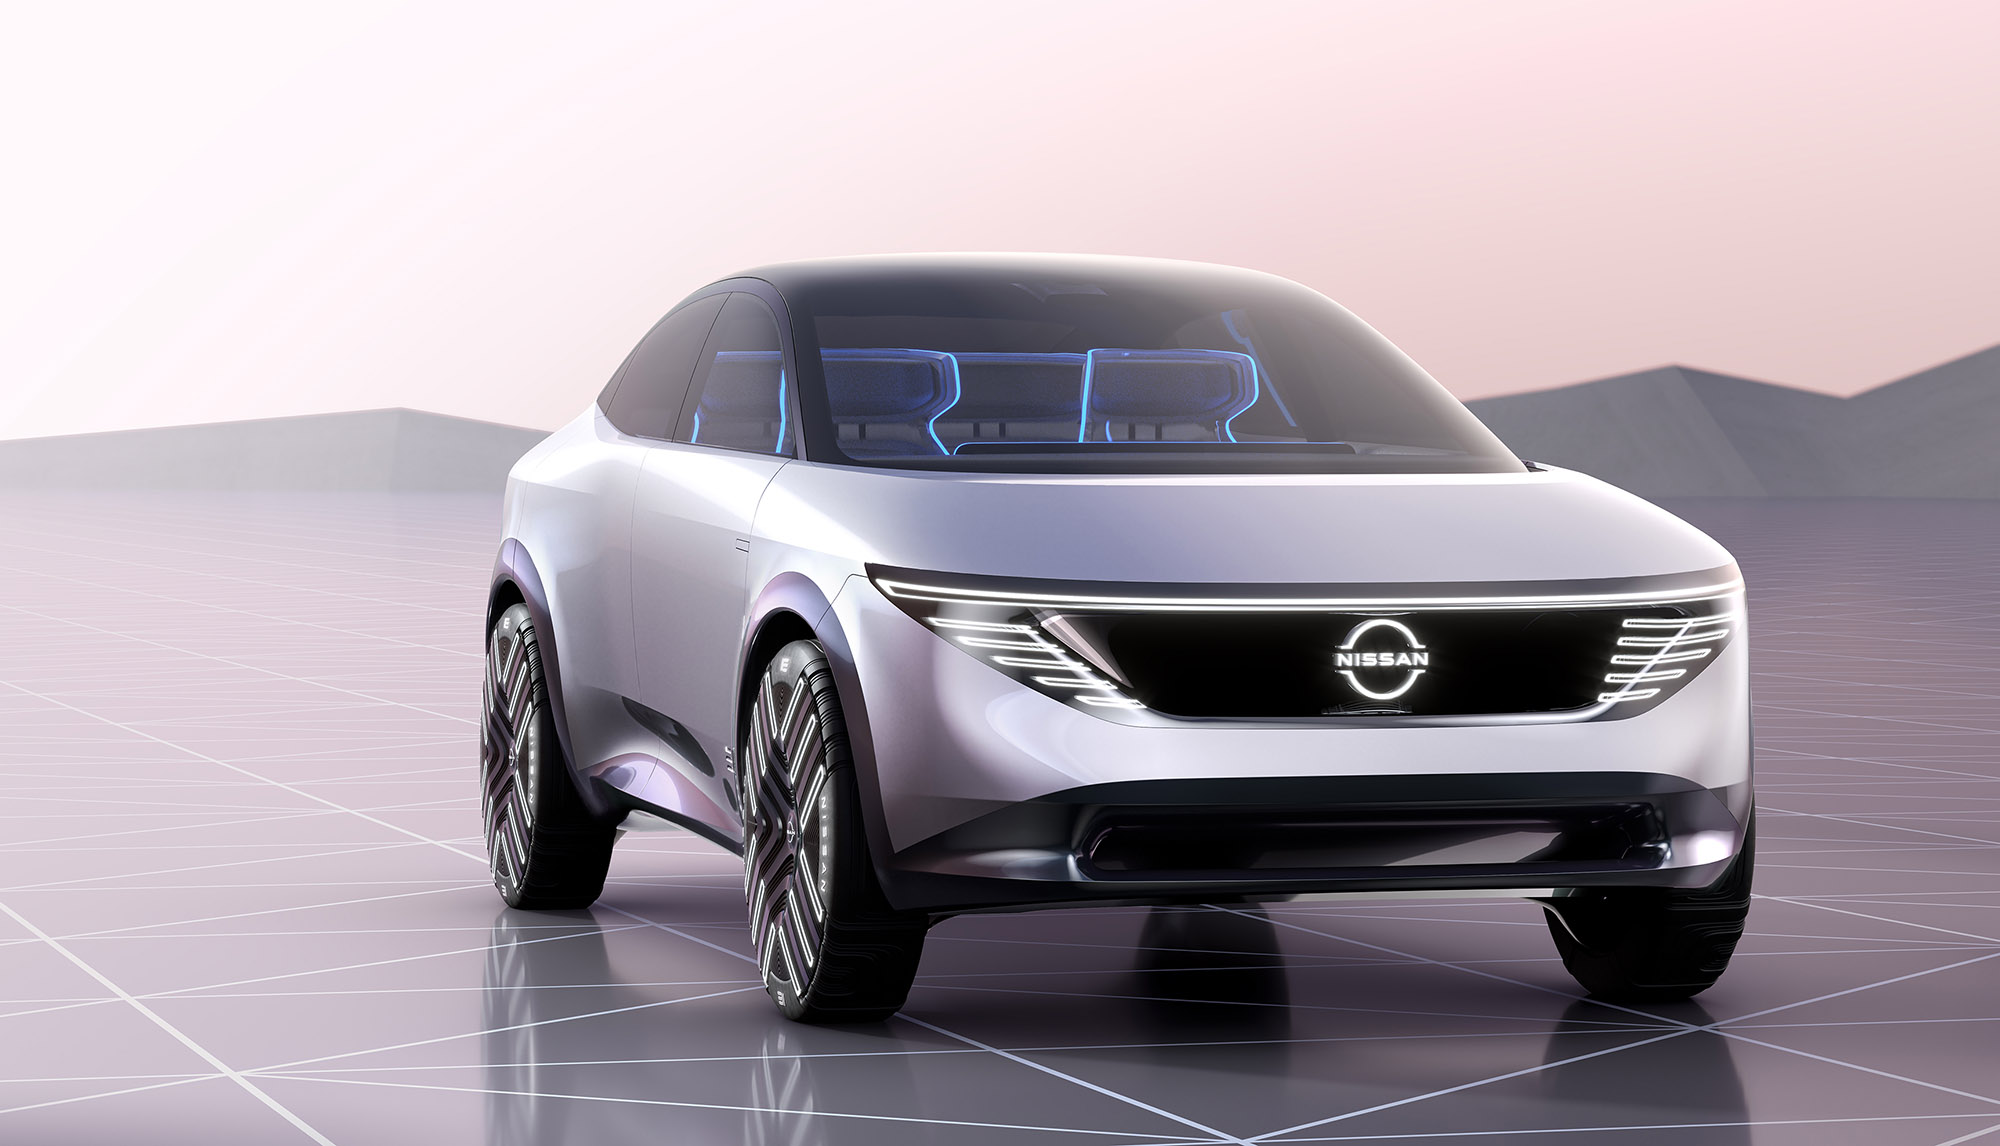 Nissan to invest $17.6 billion in EV development over the next five years 